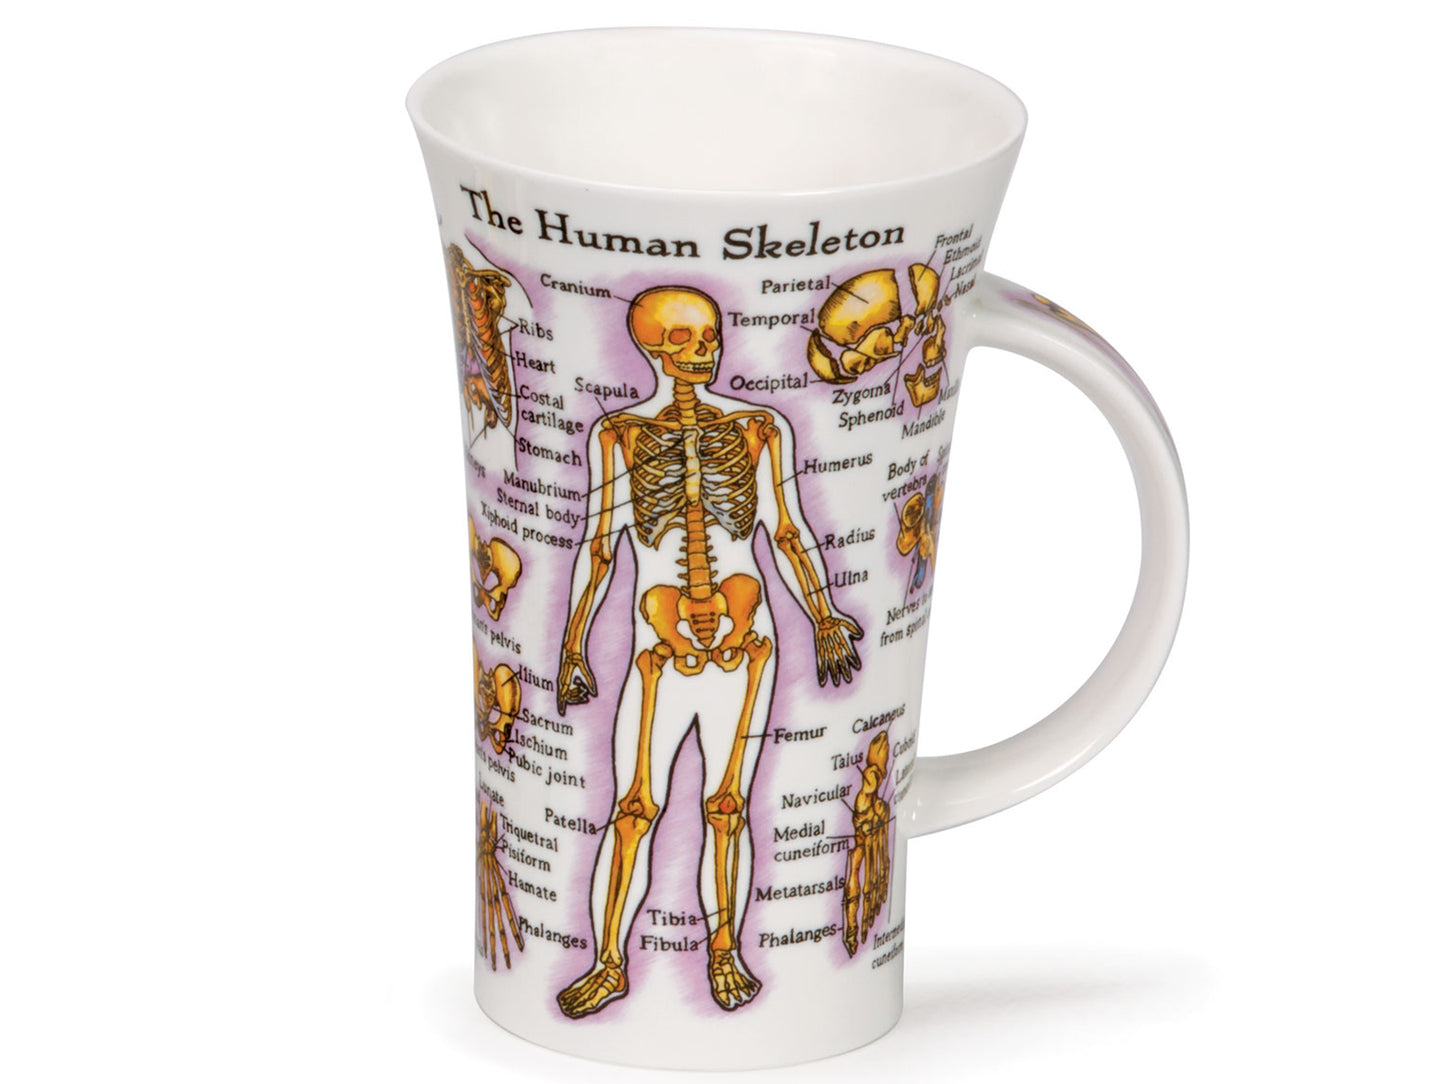 Dunoon Glencoe Human Body Mug is a large fine bone china mug that has fully-labelled diagrams of both the human skeleton and the muscles in the human body printed on its exterior.